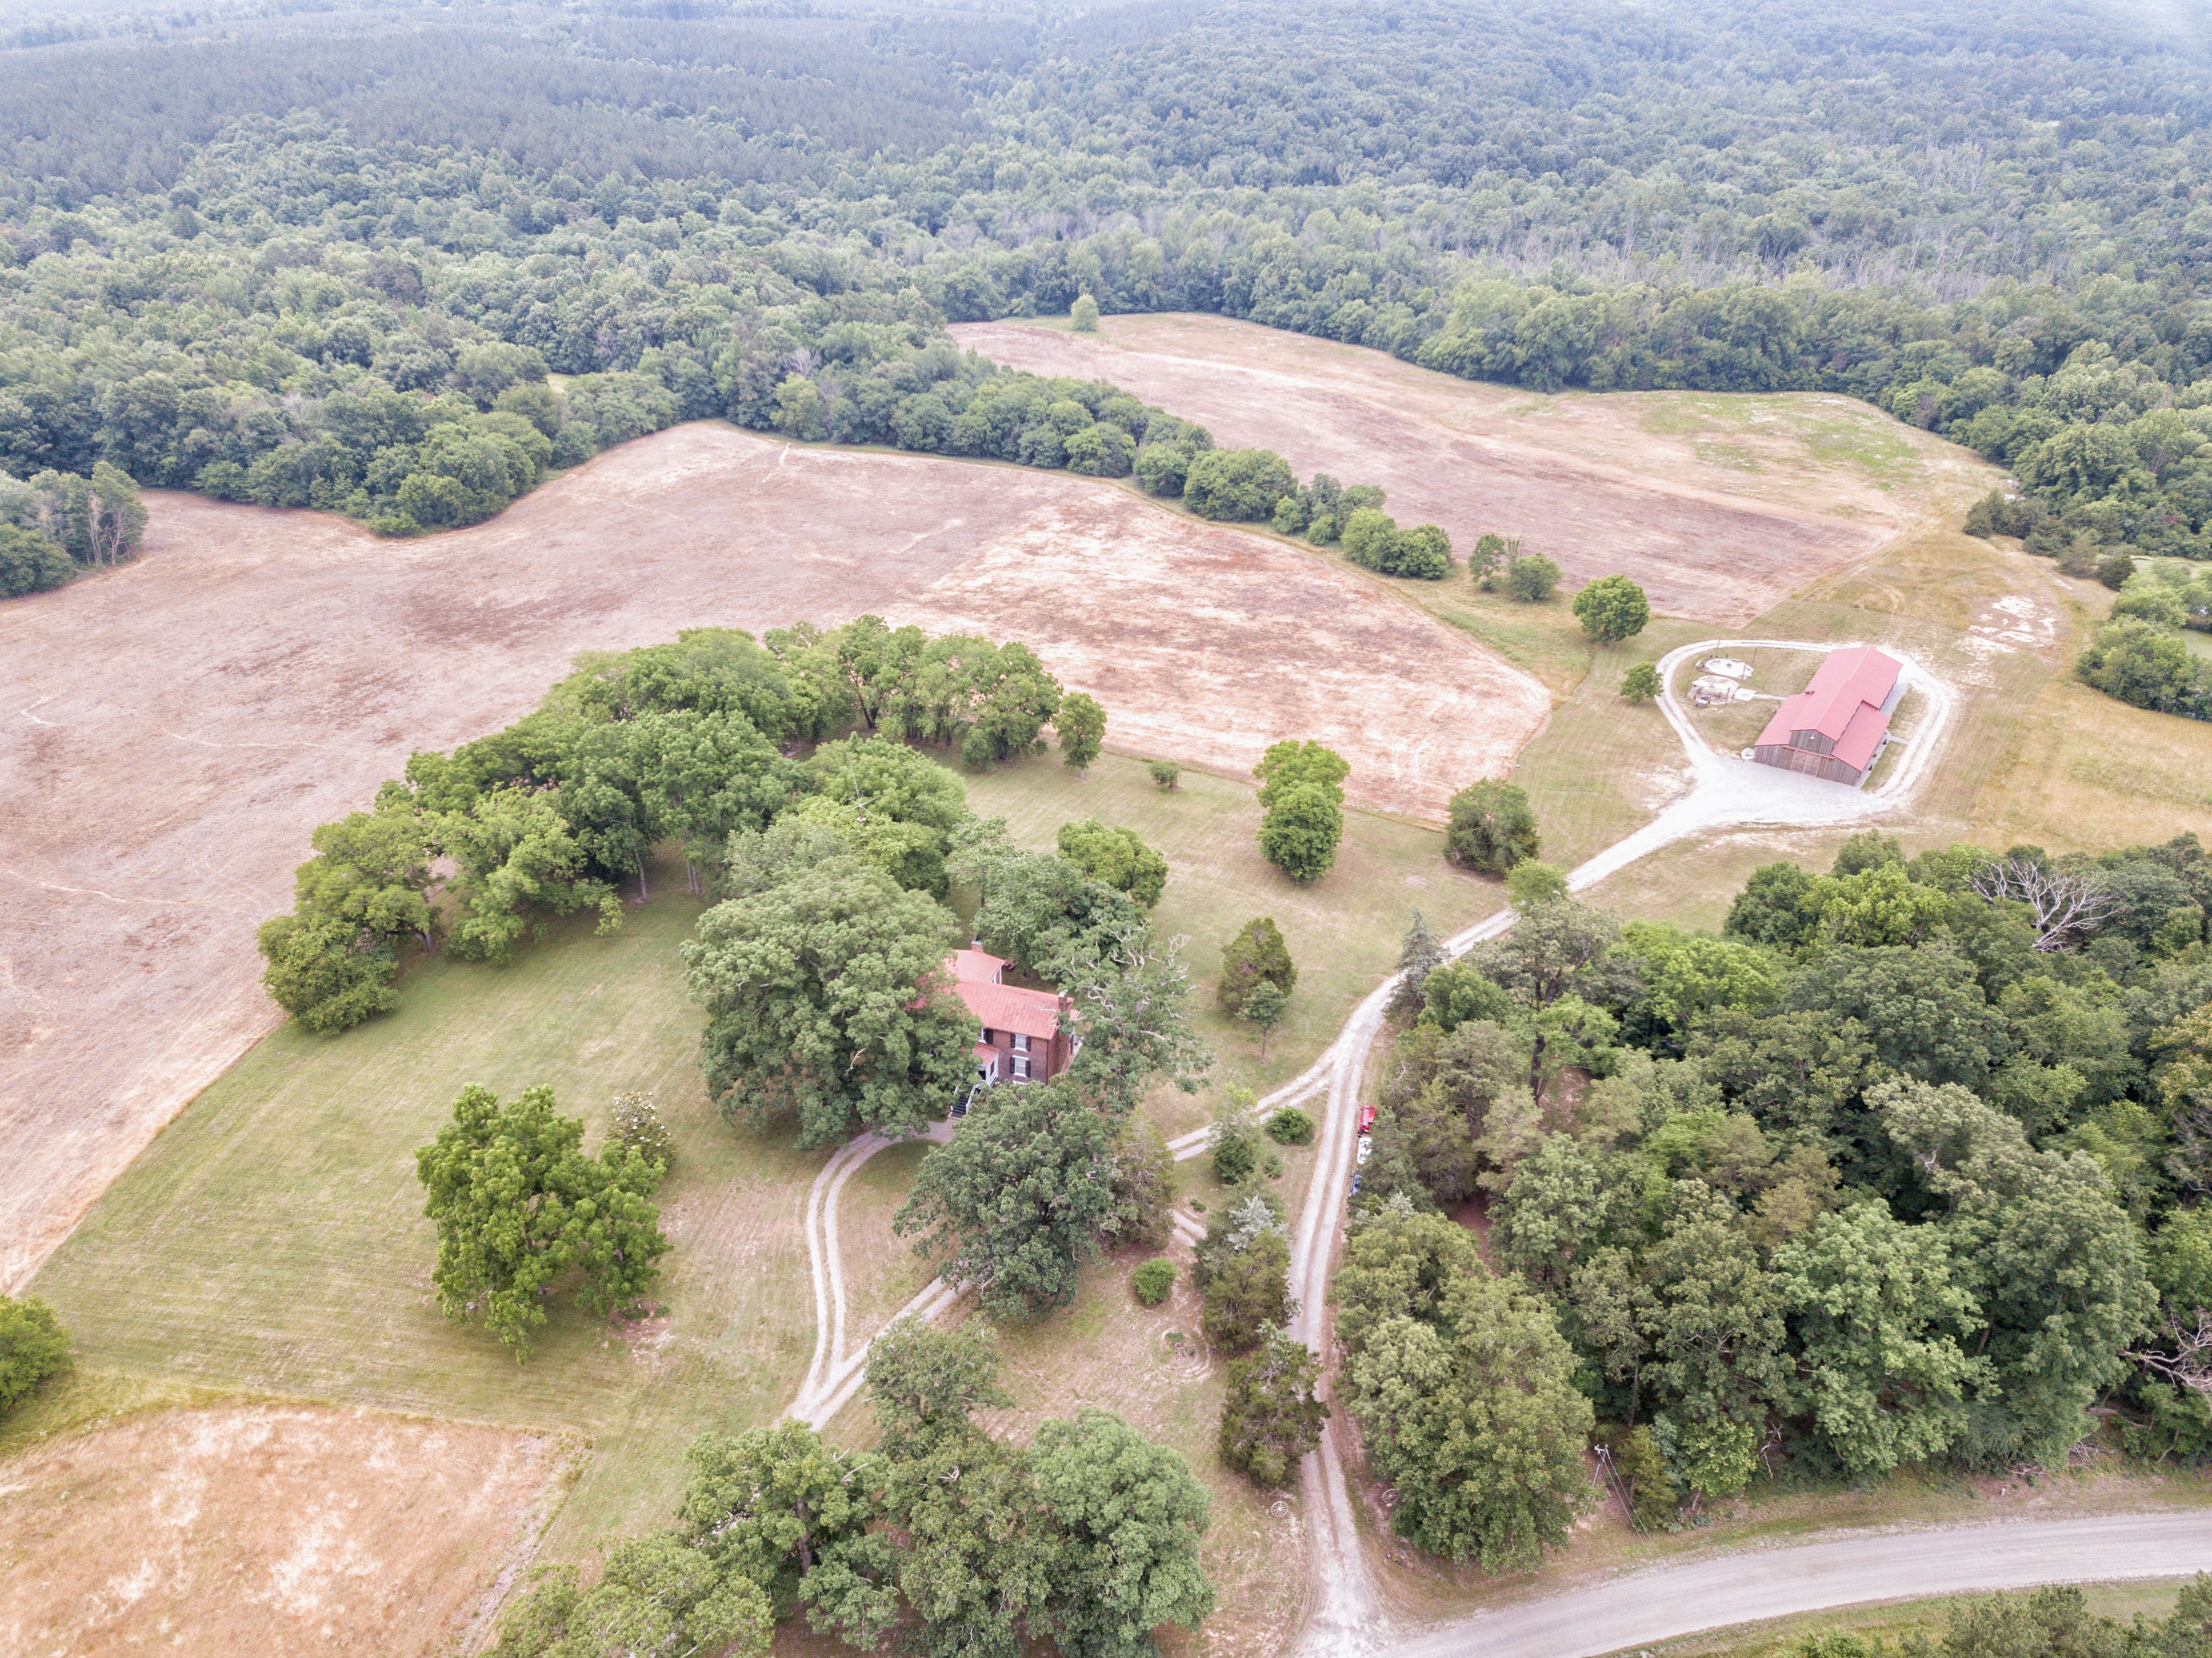 Aerial view of property with barn